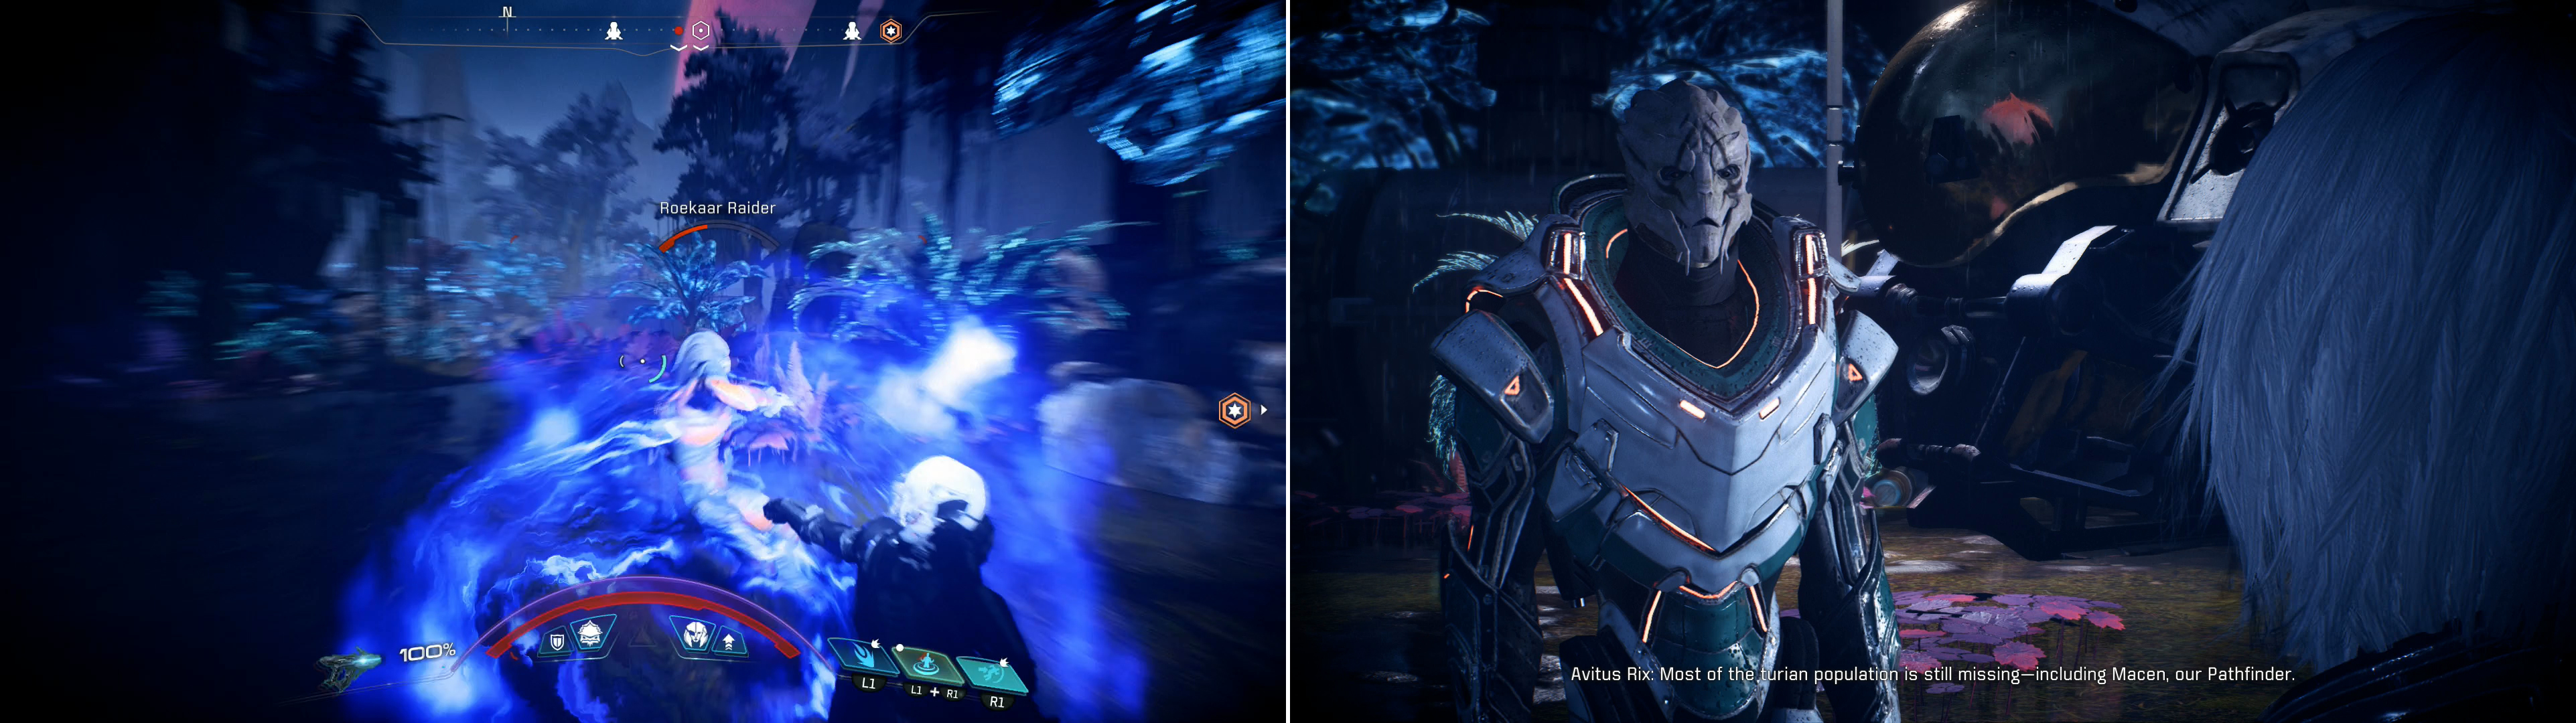 Fend off the Roekaar attacking the Turian camp (left) then talk to Avitus Rix (right) to learn what he knows of the Turian Arks fate.